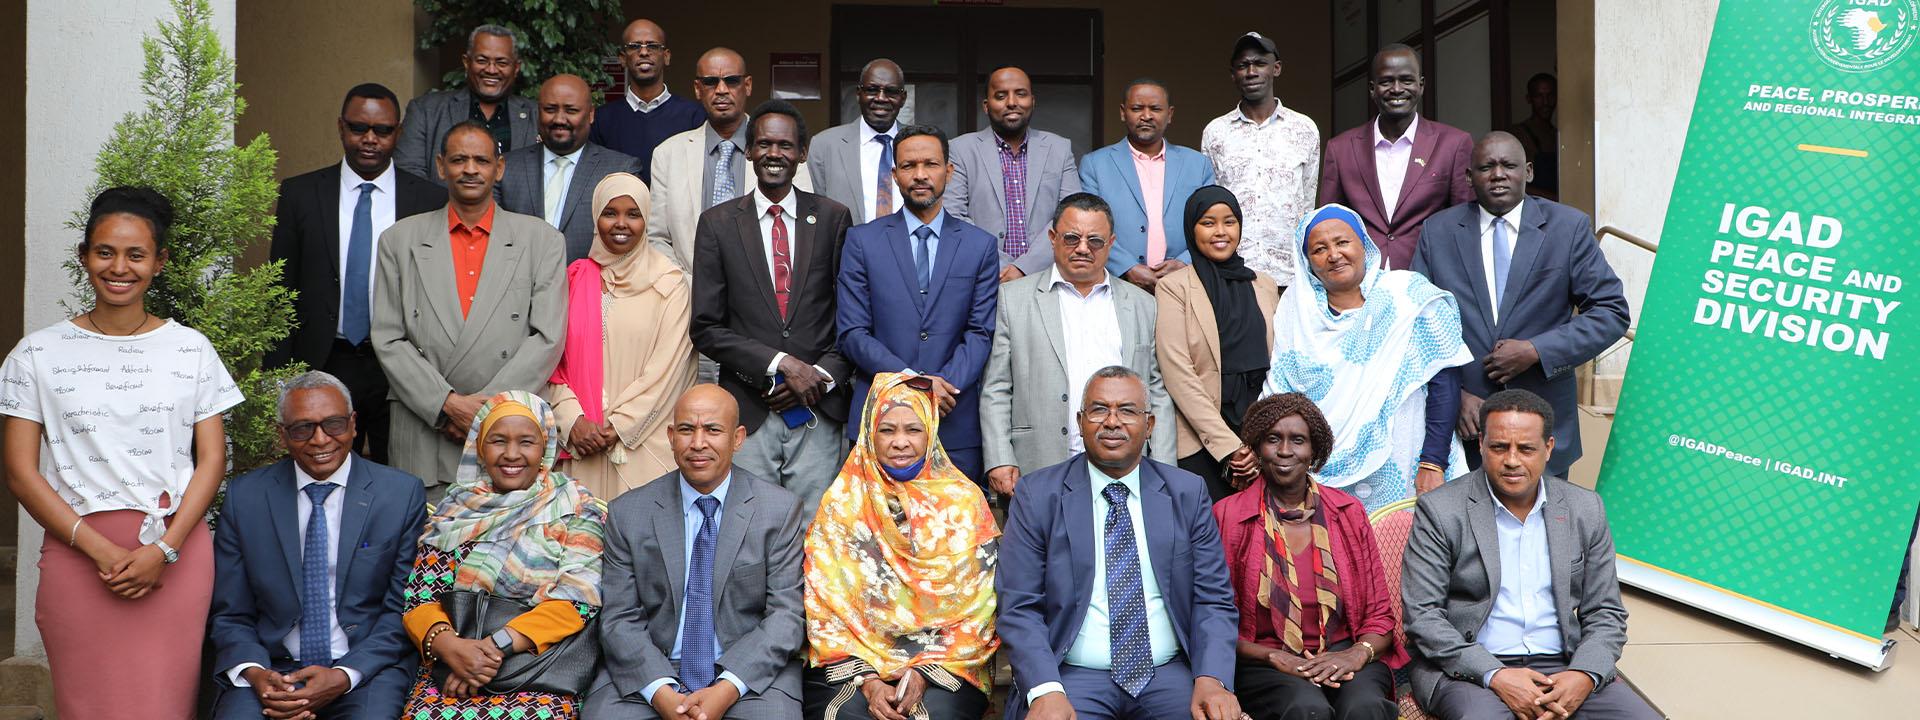 IGAD- Peace and Security Division Builds Capacities on Post Conflict Reconstruction and Development (PCRD) for Member States.